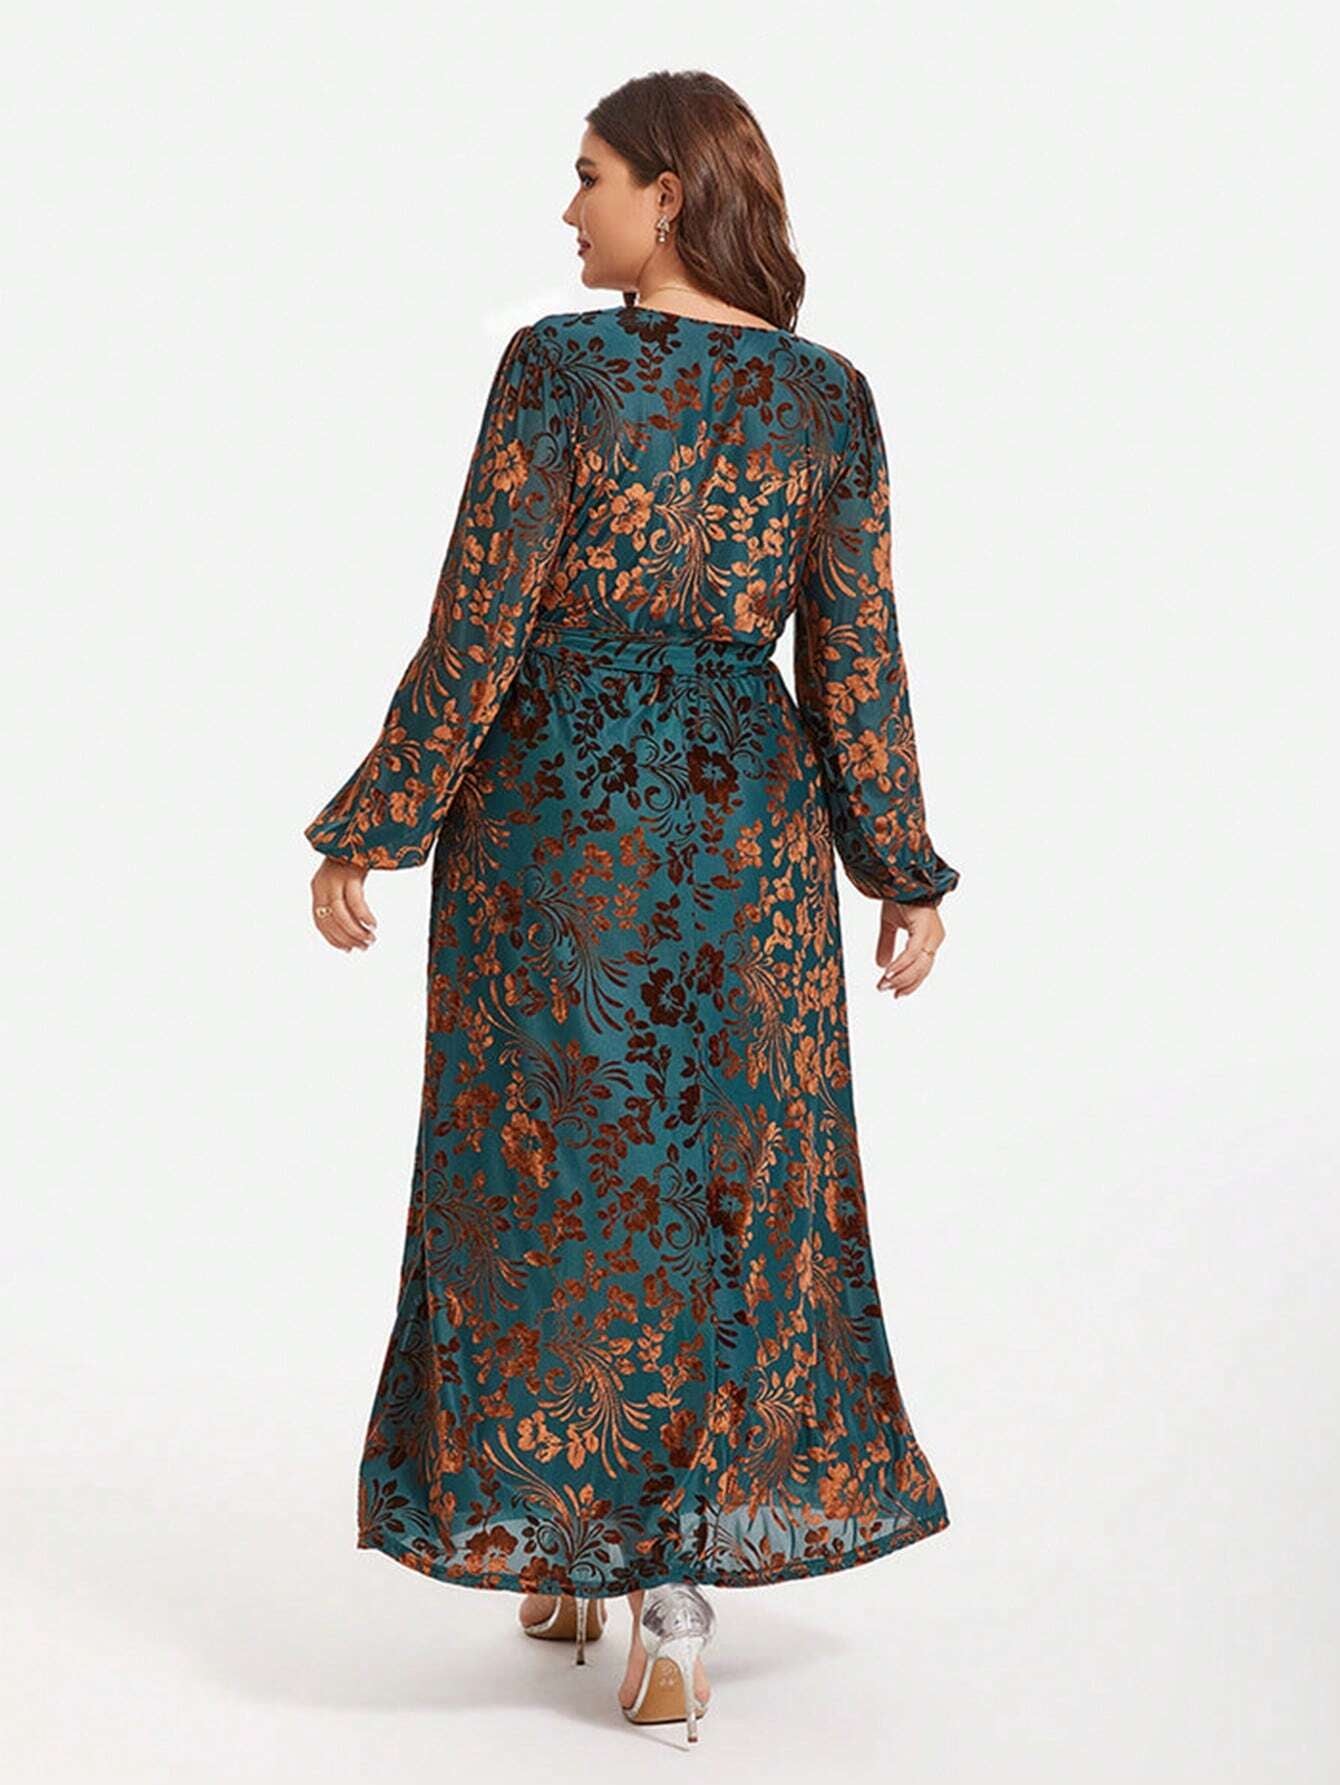 Elegant Velvet Floral Print Wrap Dress - Perfect for Every Occasion!